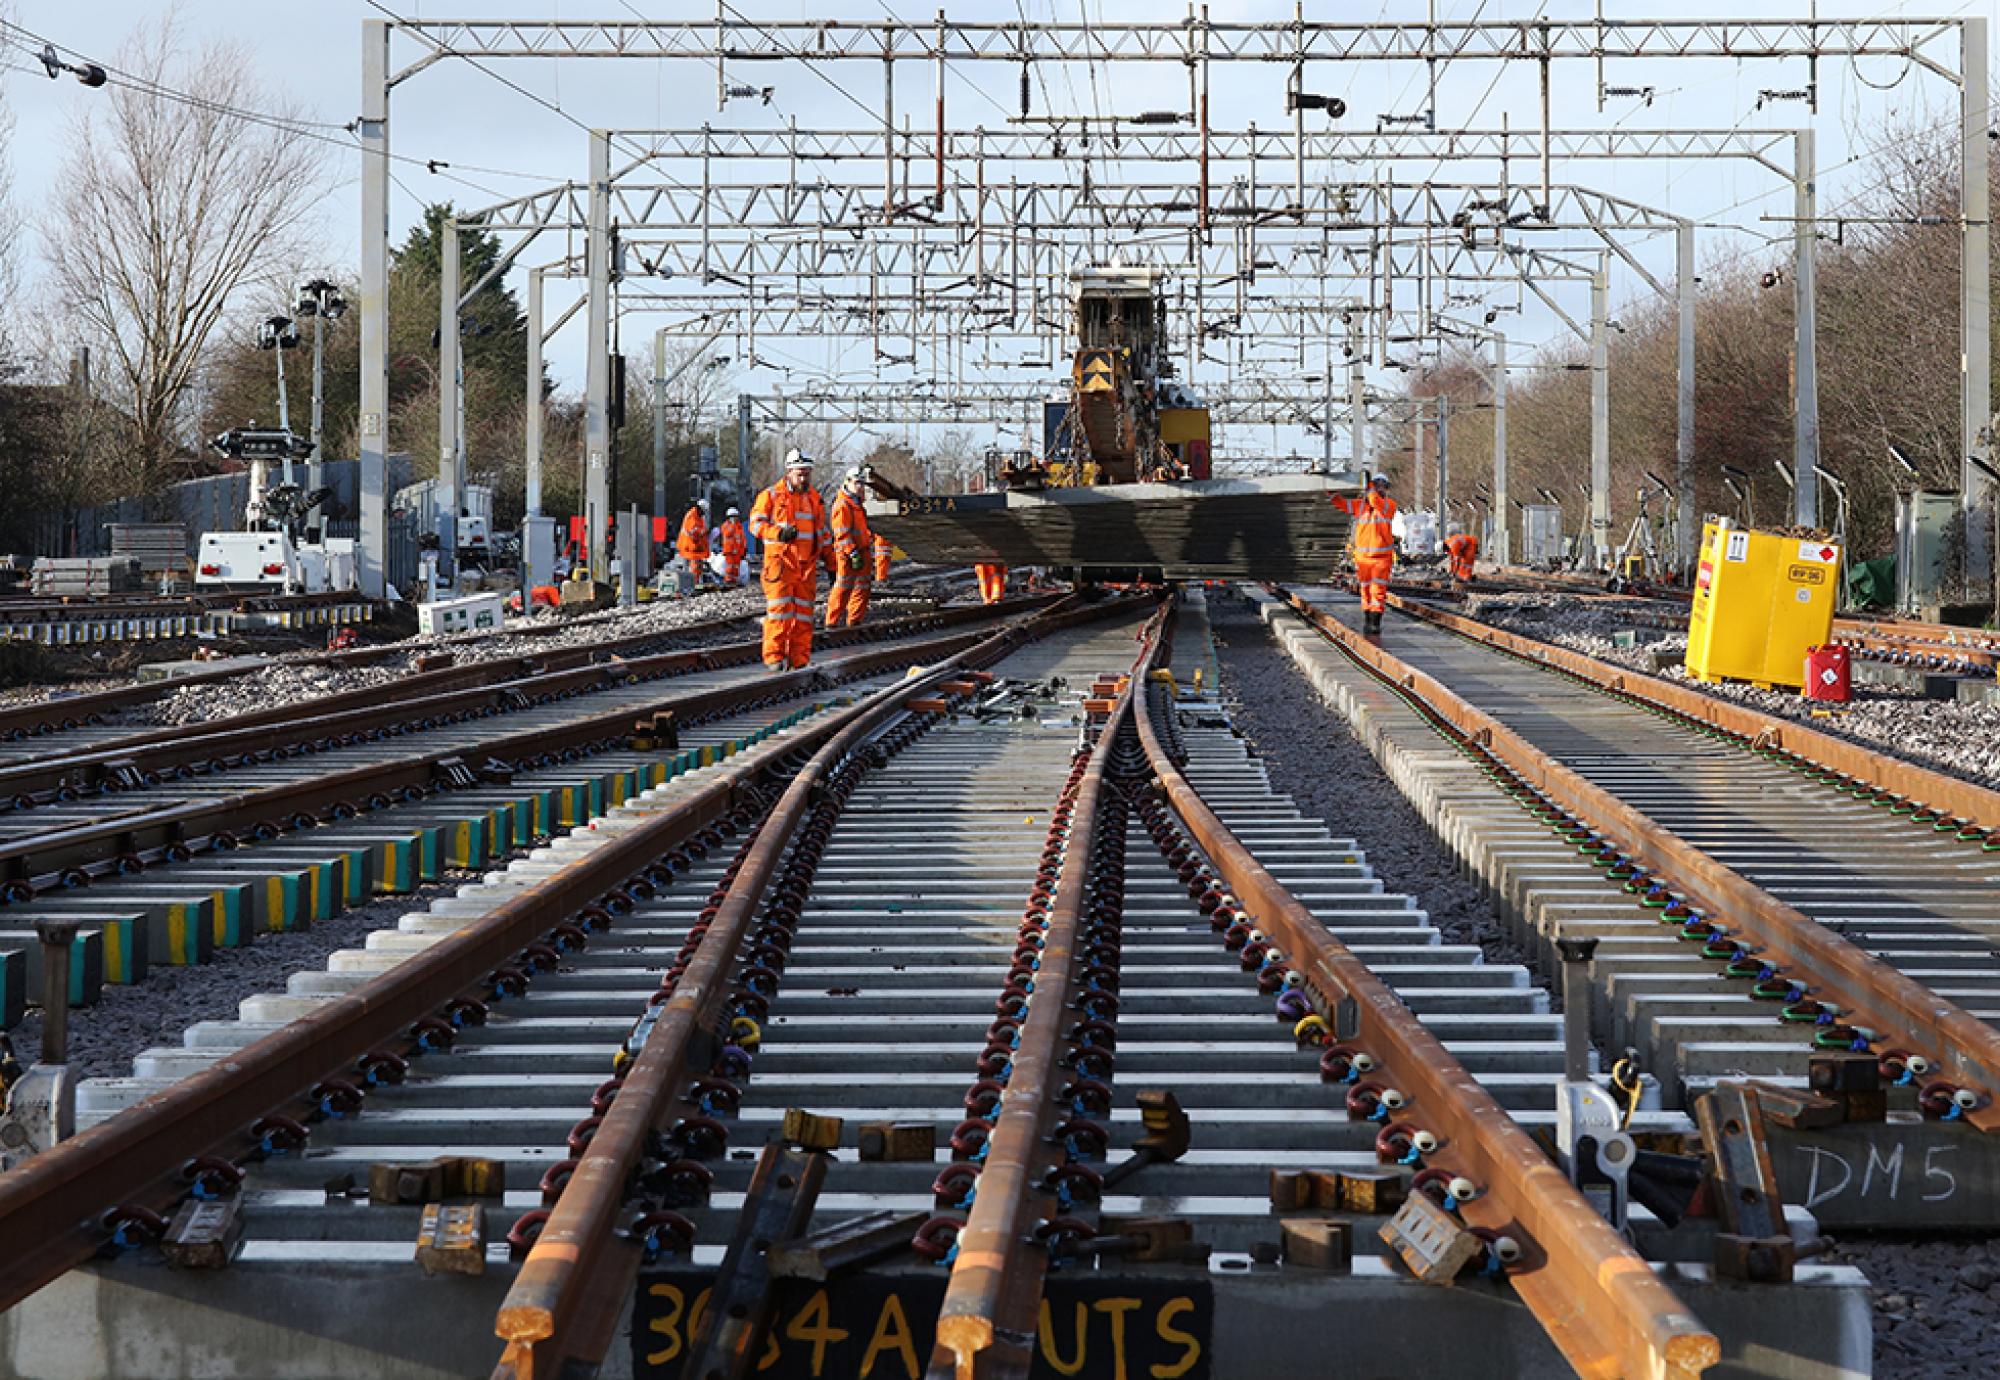 Autumn track upgrades to happen on crucial Ipswich – Norwich line